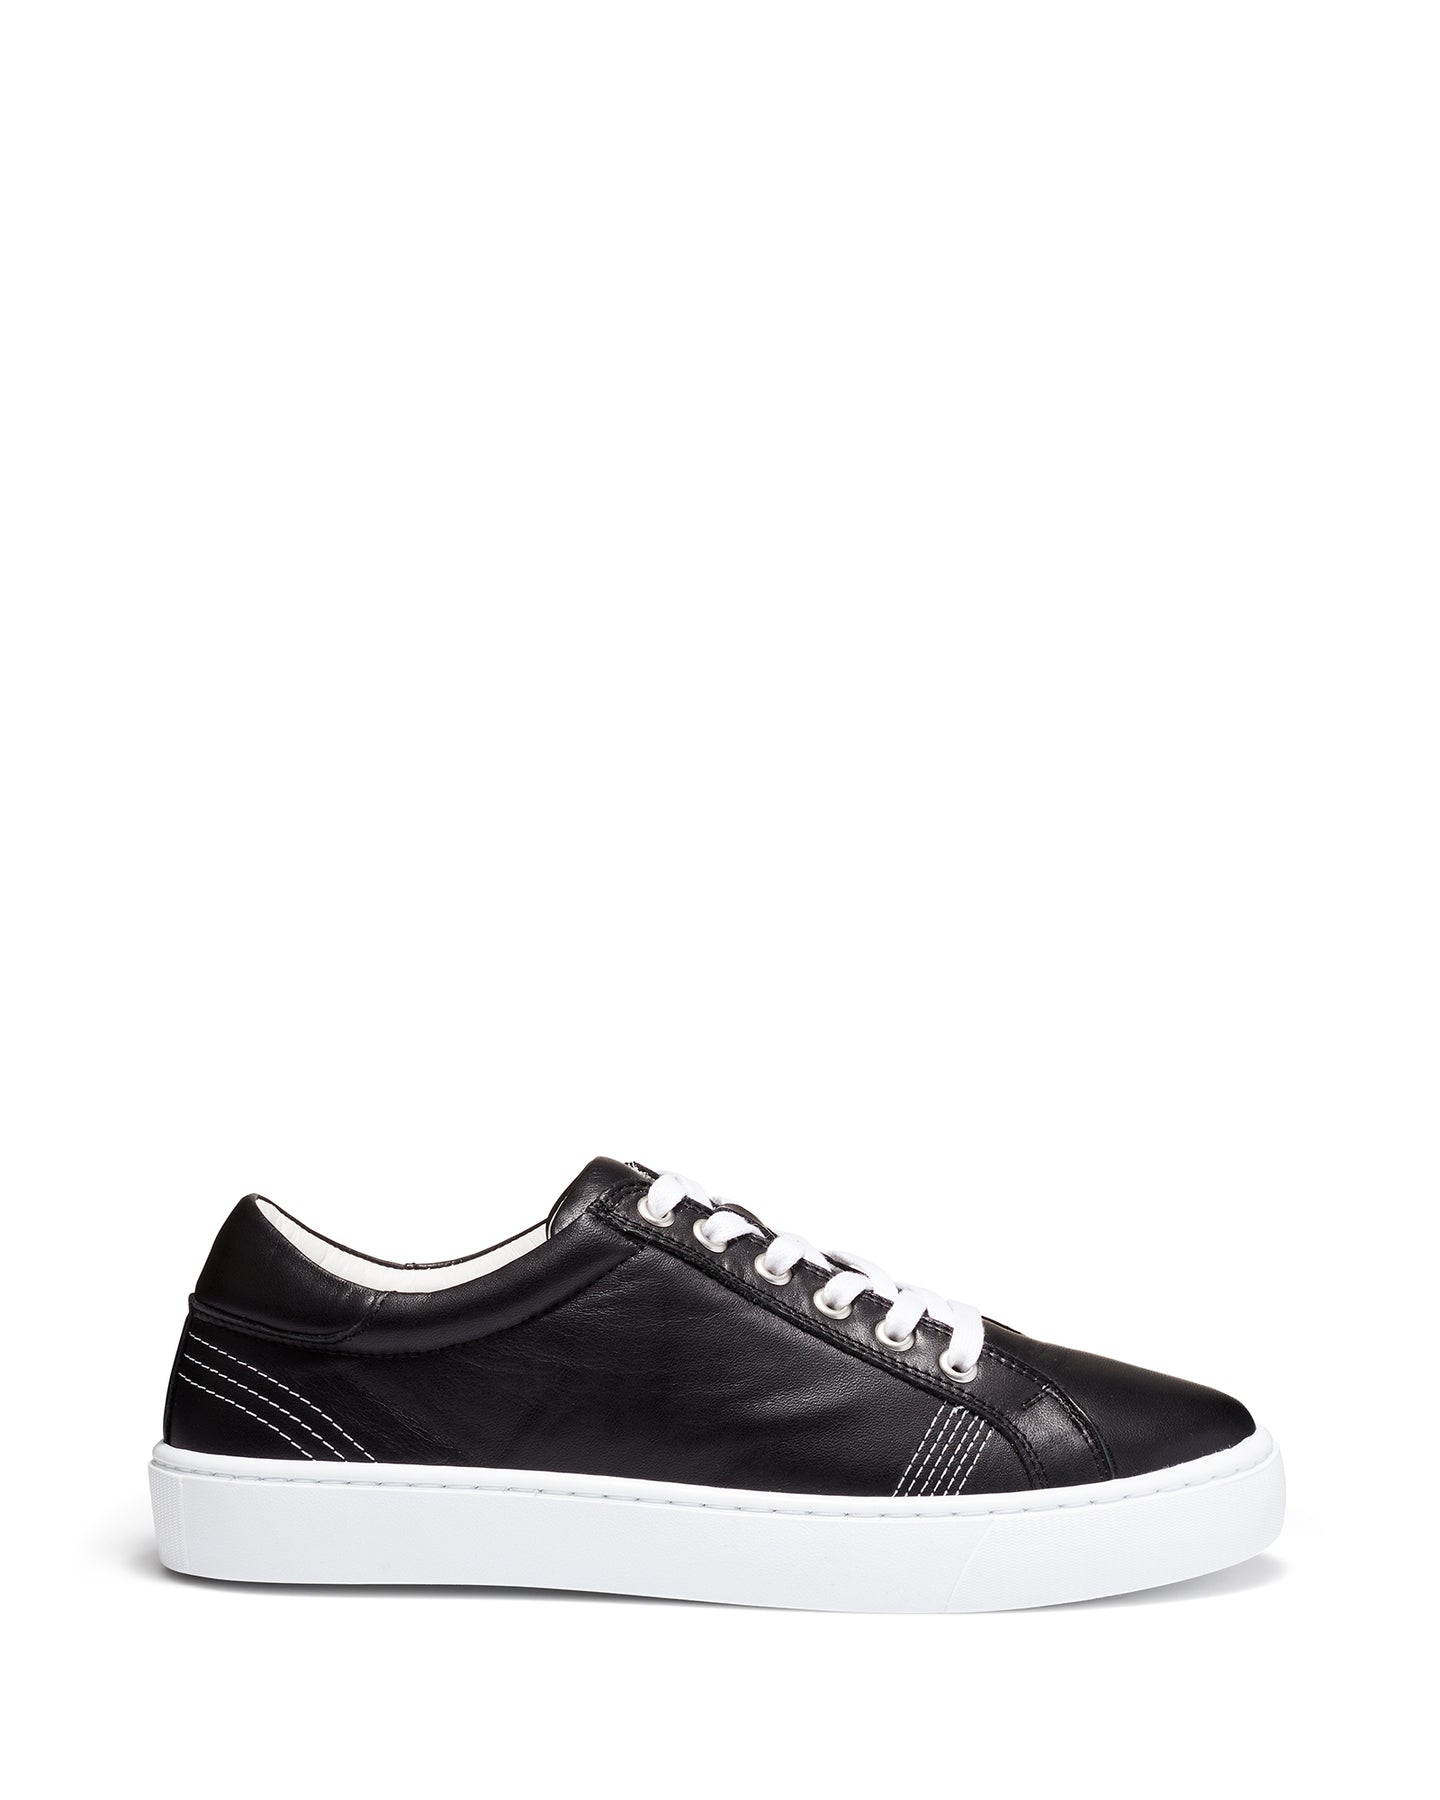 Just Because Shoes Bahar Black | Leather Sneaker | Lace Up | Flat 